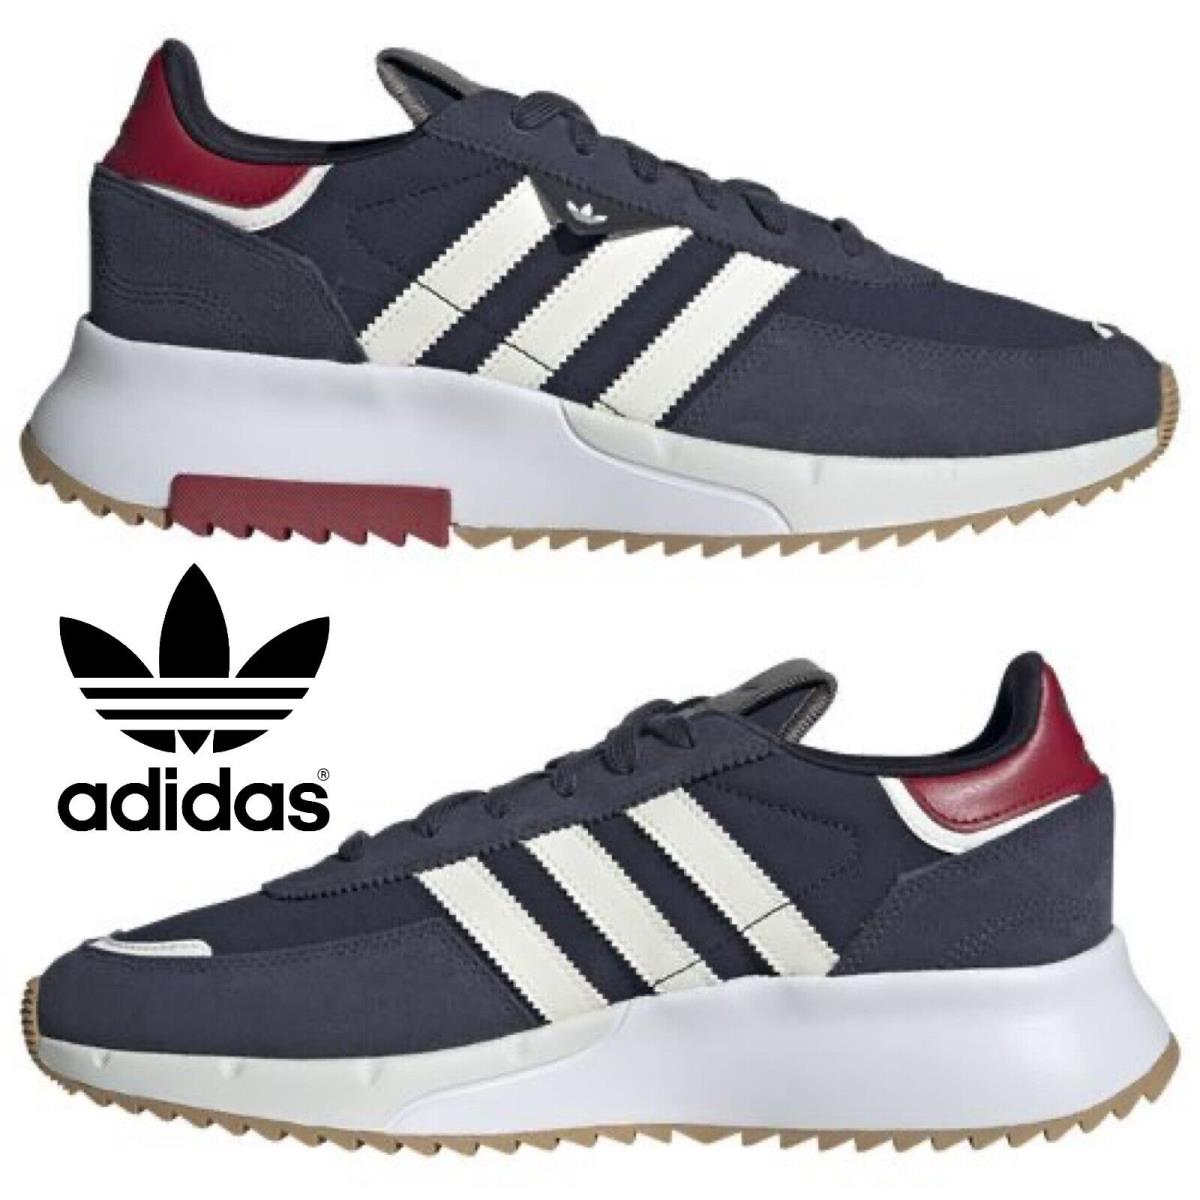 Adidas Retropy F2 Men`s Sneakers Running Shoes Gym Casual Sport Green Navy Blue - Blue , Ink/White/Navy Manufacturer